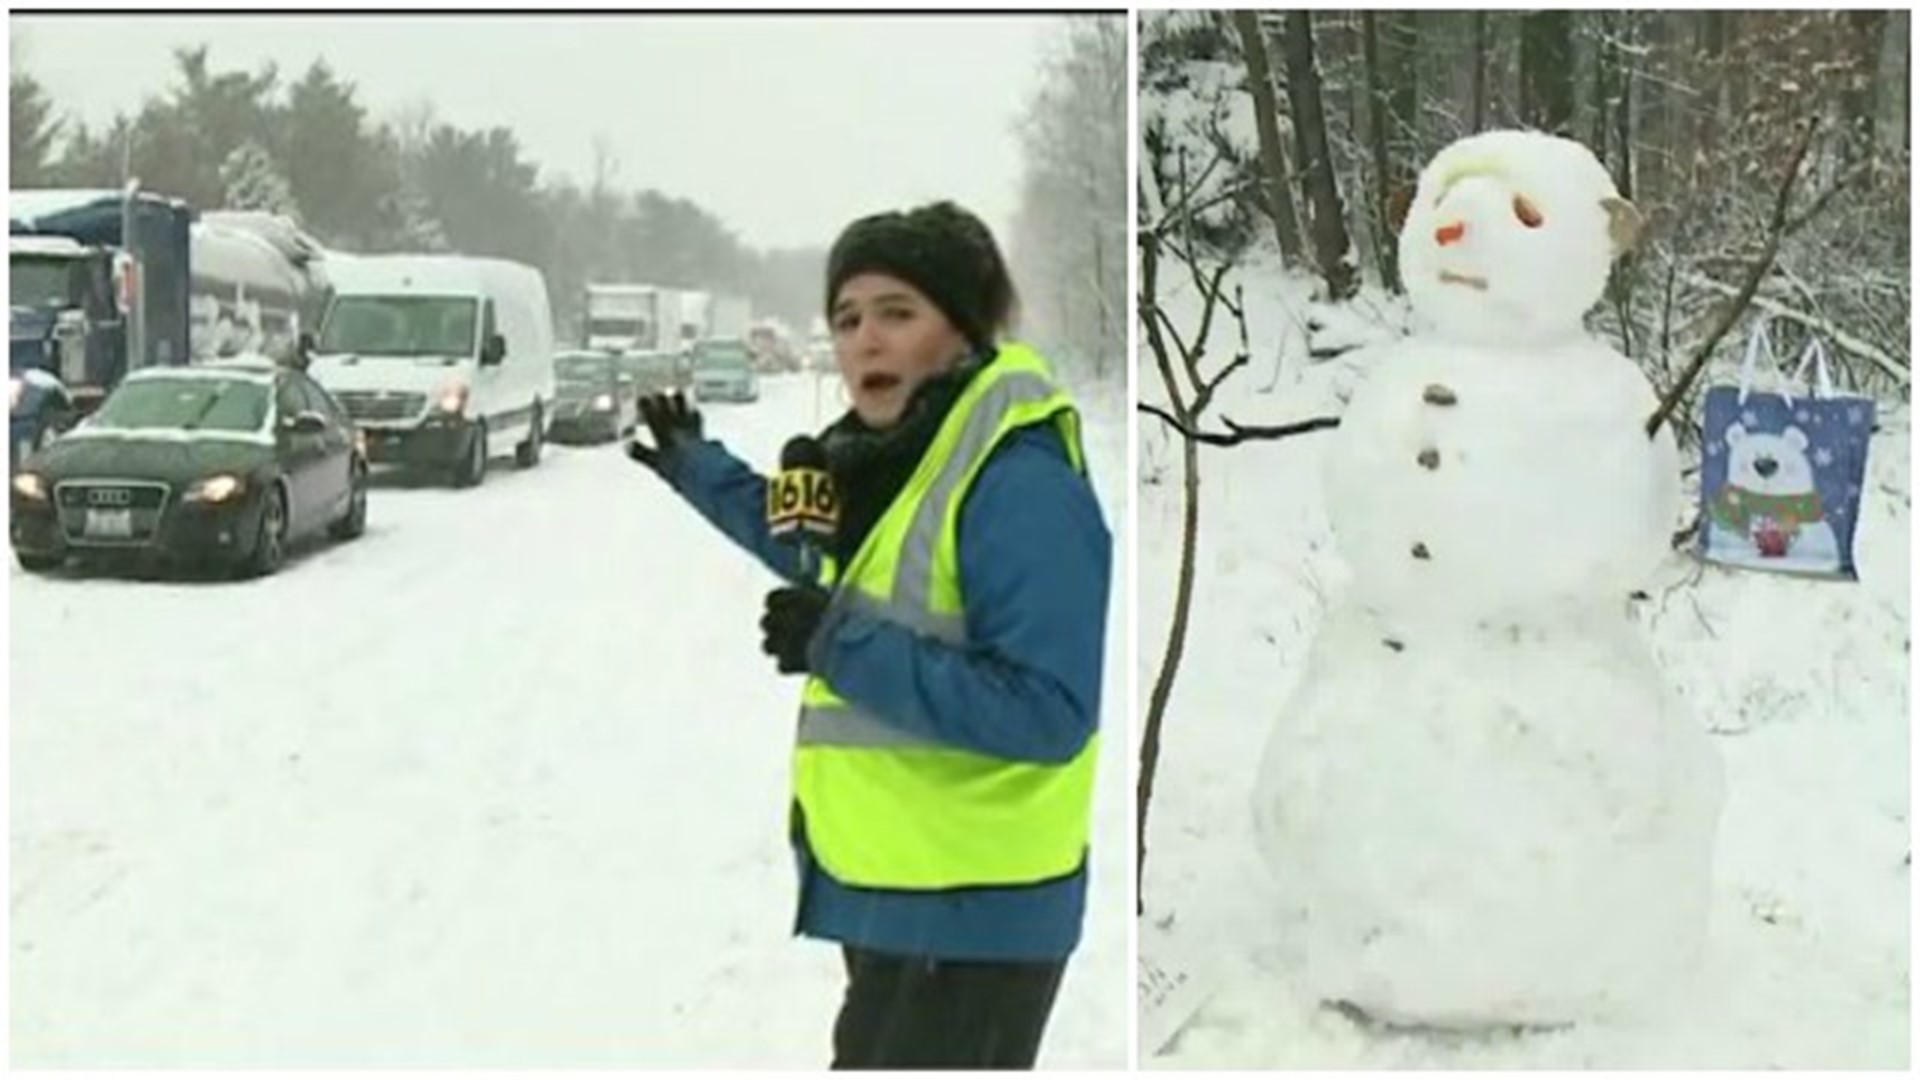 Stuck Drivers Make Snowmen While Waiting for Interstate to Reopen